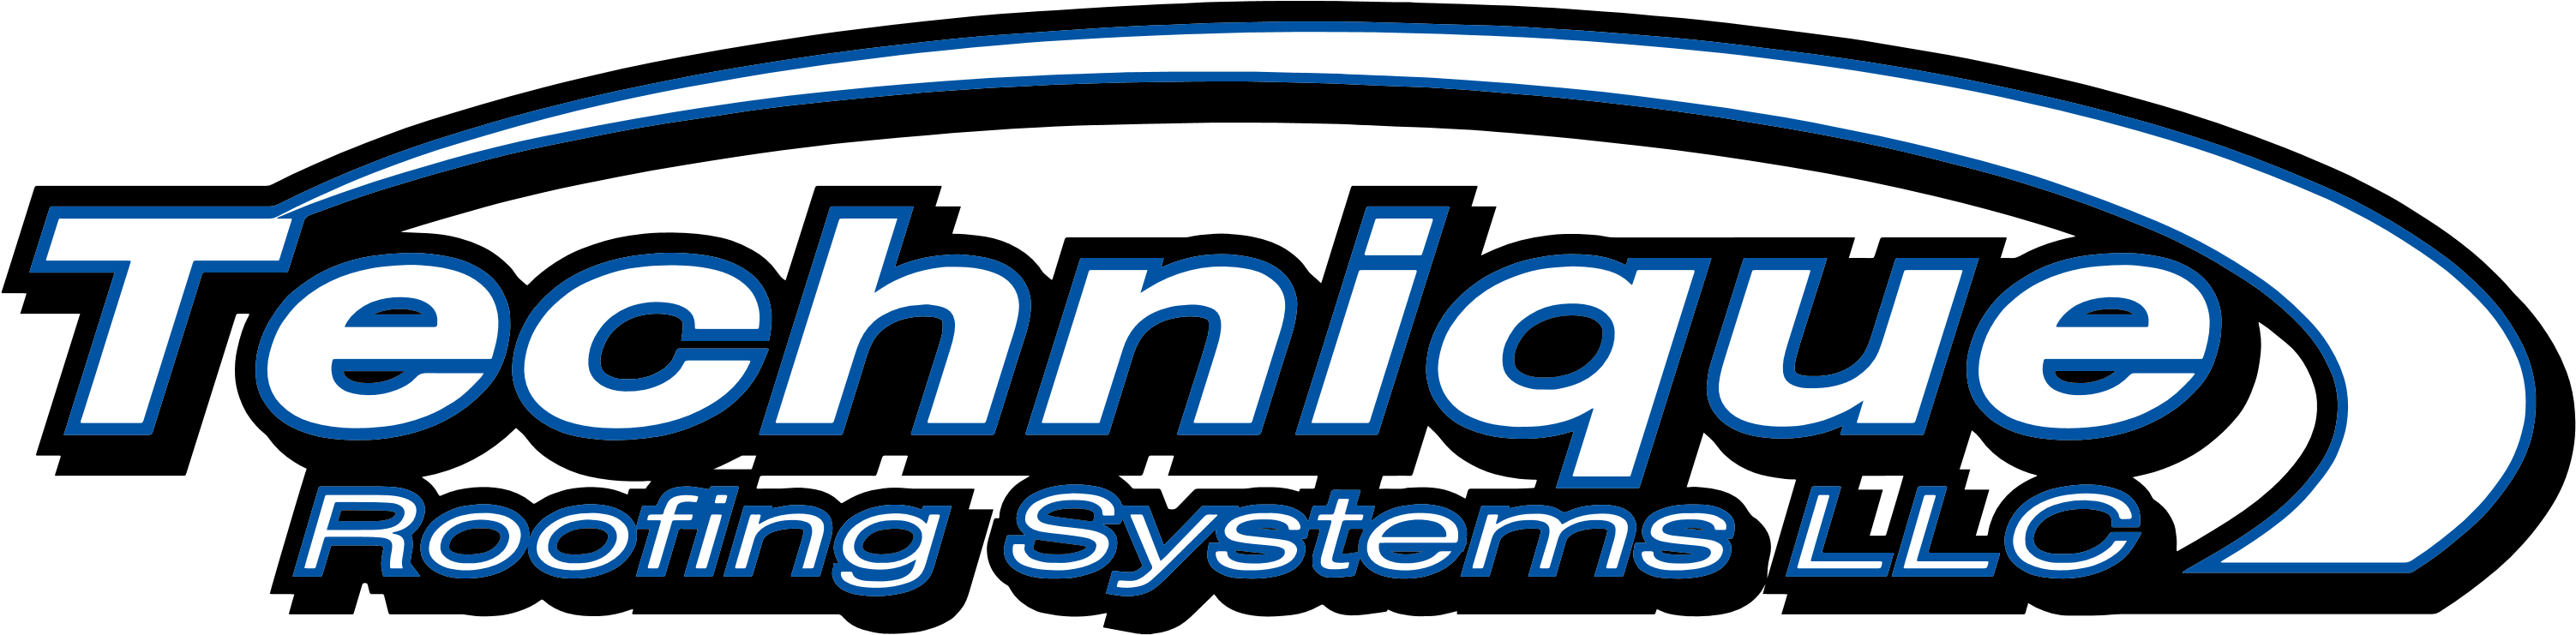 Technique Roofing Systems, LLC Logo